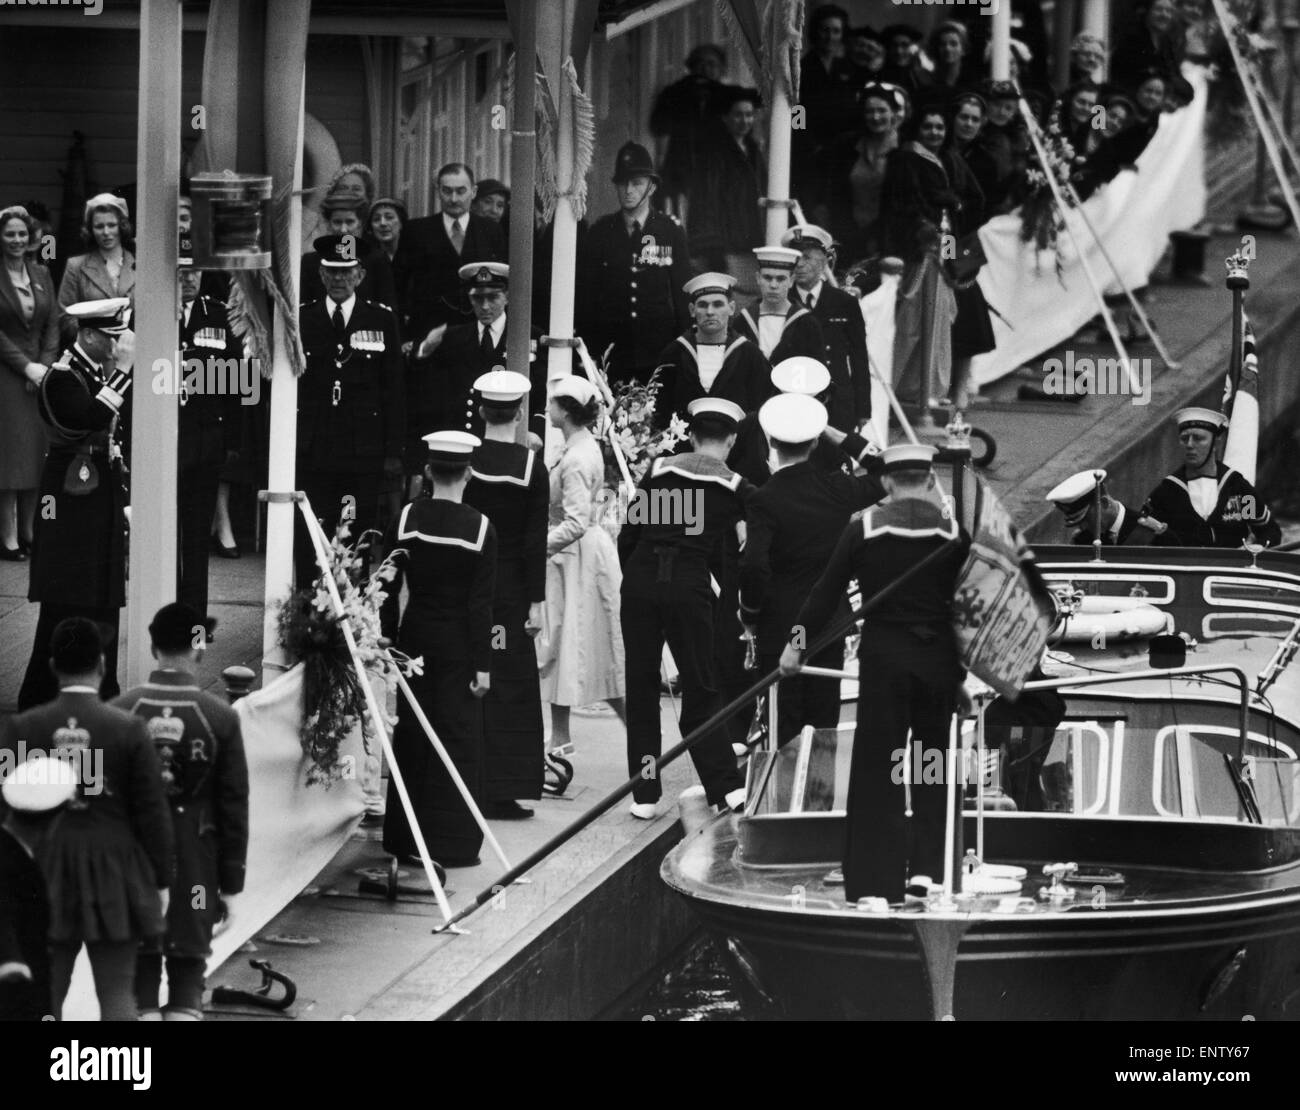 The Queen steps ashore from the Royal Barge at Wesminster Pier met by her family and Admirals of the fleet. 15th May 1954. Stock Photo